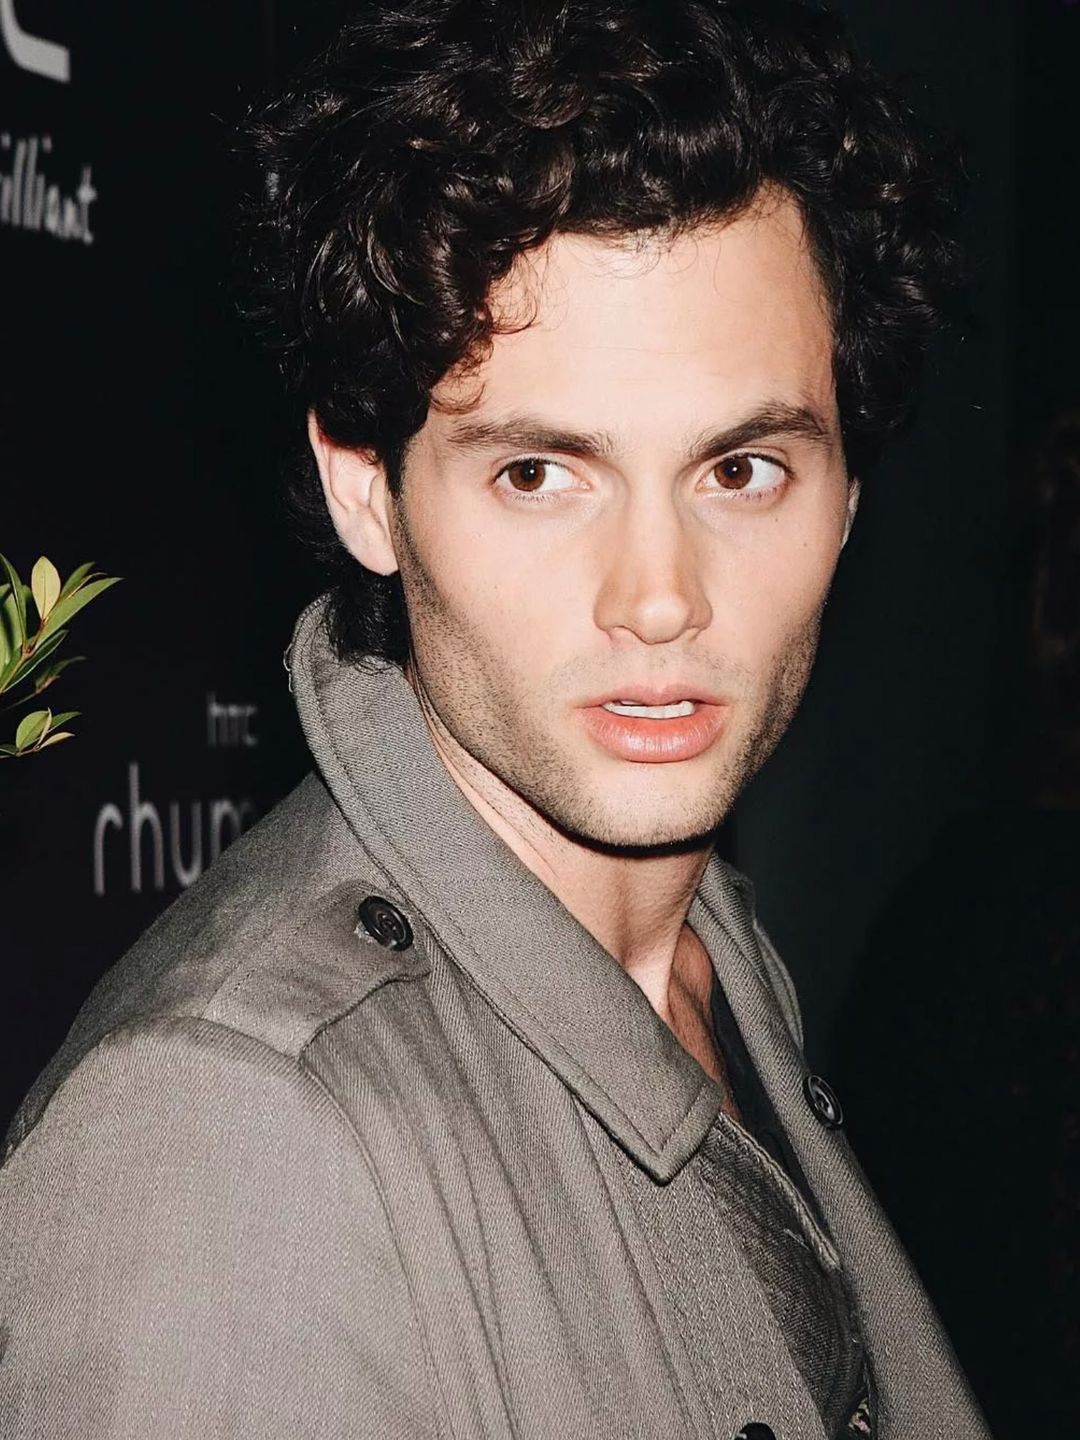 Penn Badgley who is his mother